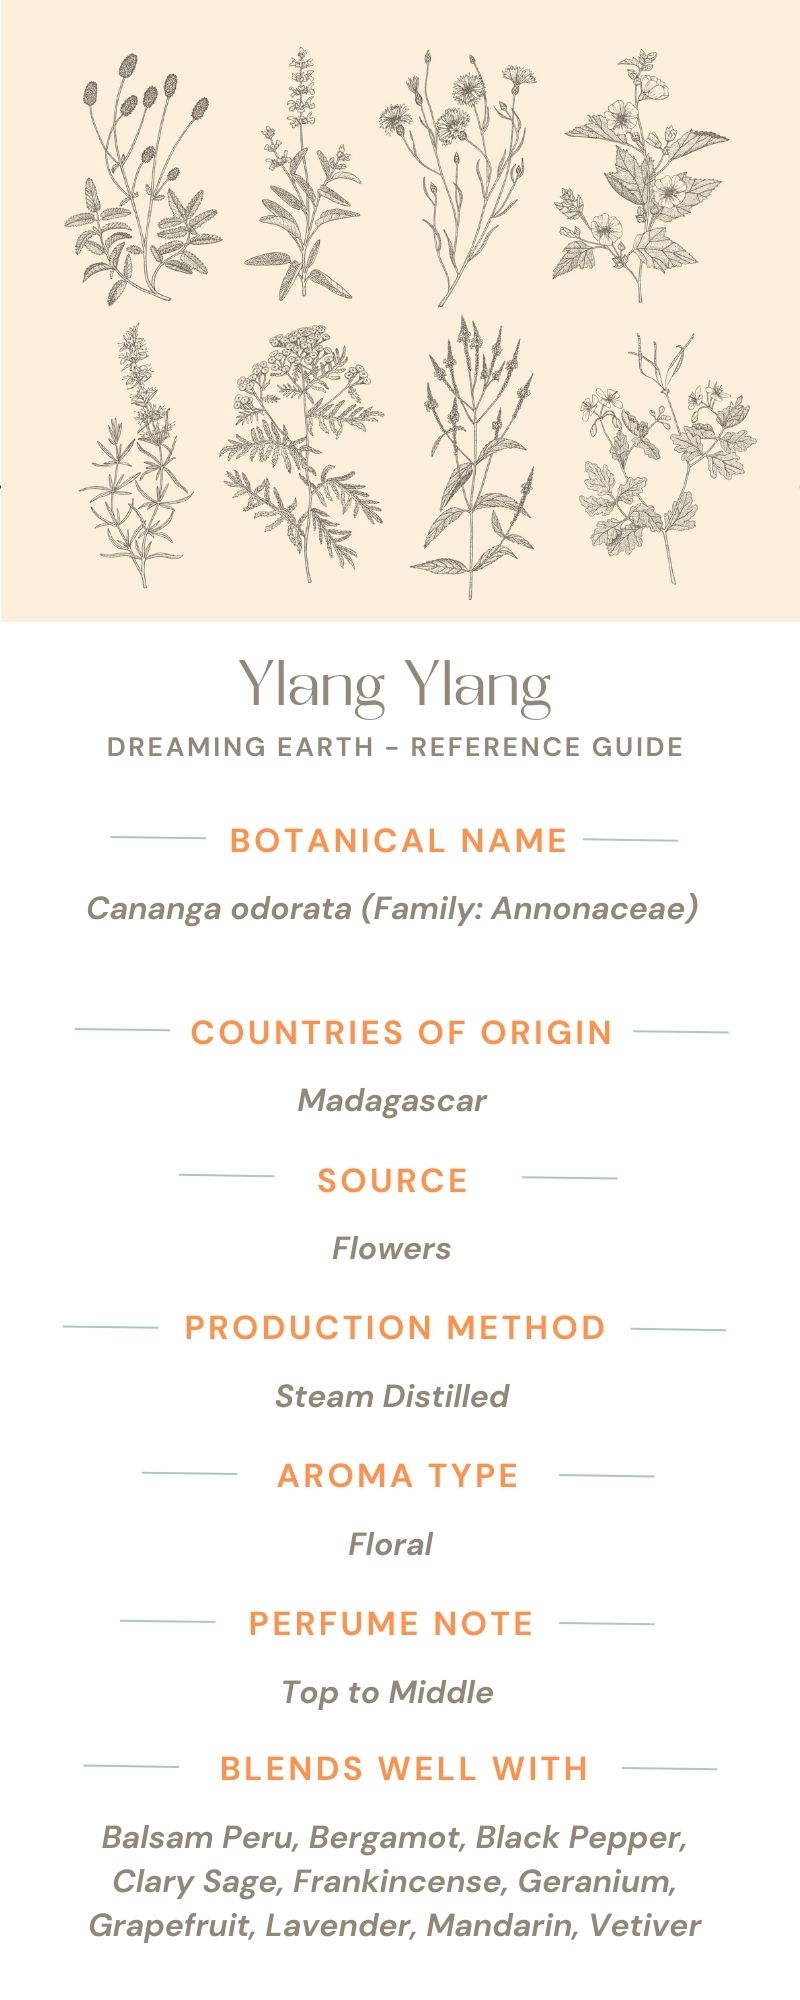 Load image into Gallery viewer, Ylang Ylang 1 Essential Oil - Dreaming Earth Inc
